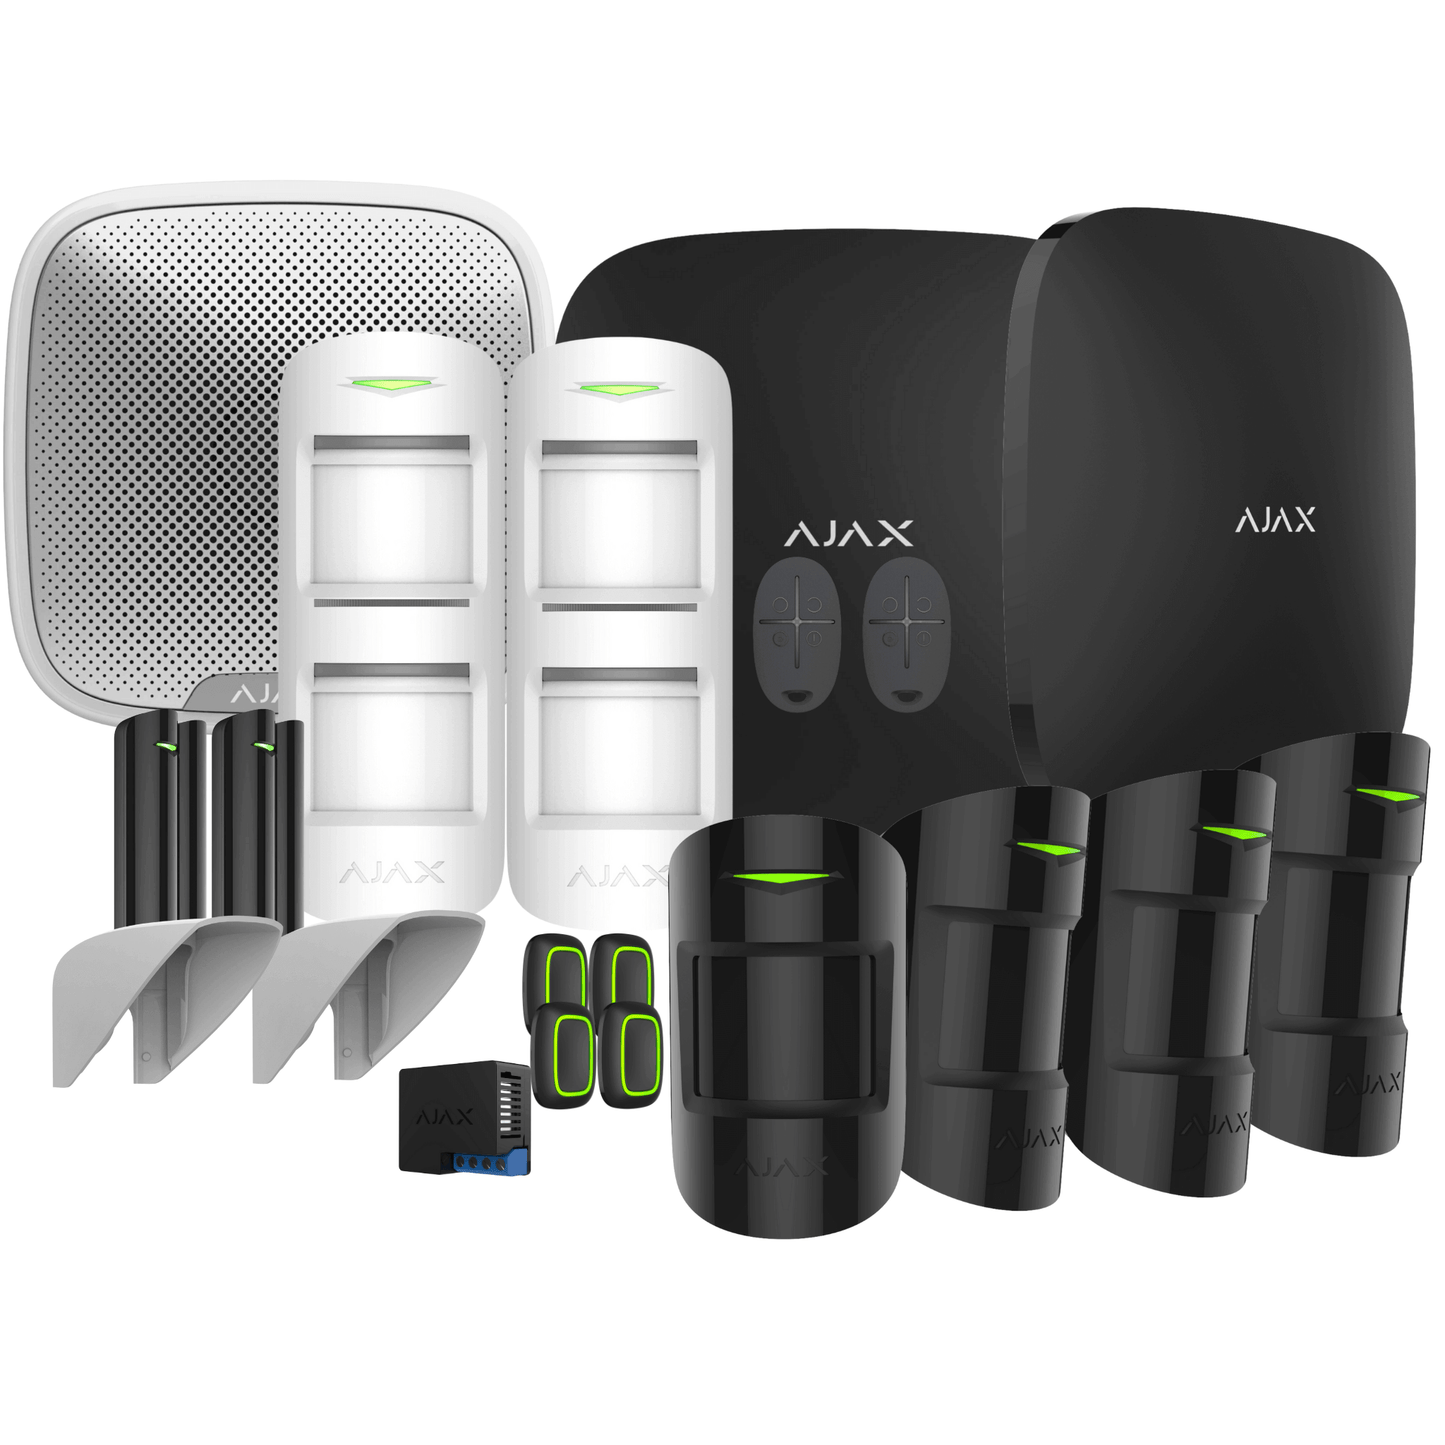 Ajax Alarm Systems Estate Kit - Ultimate Home Security Solution